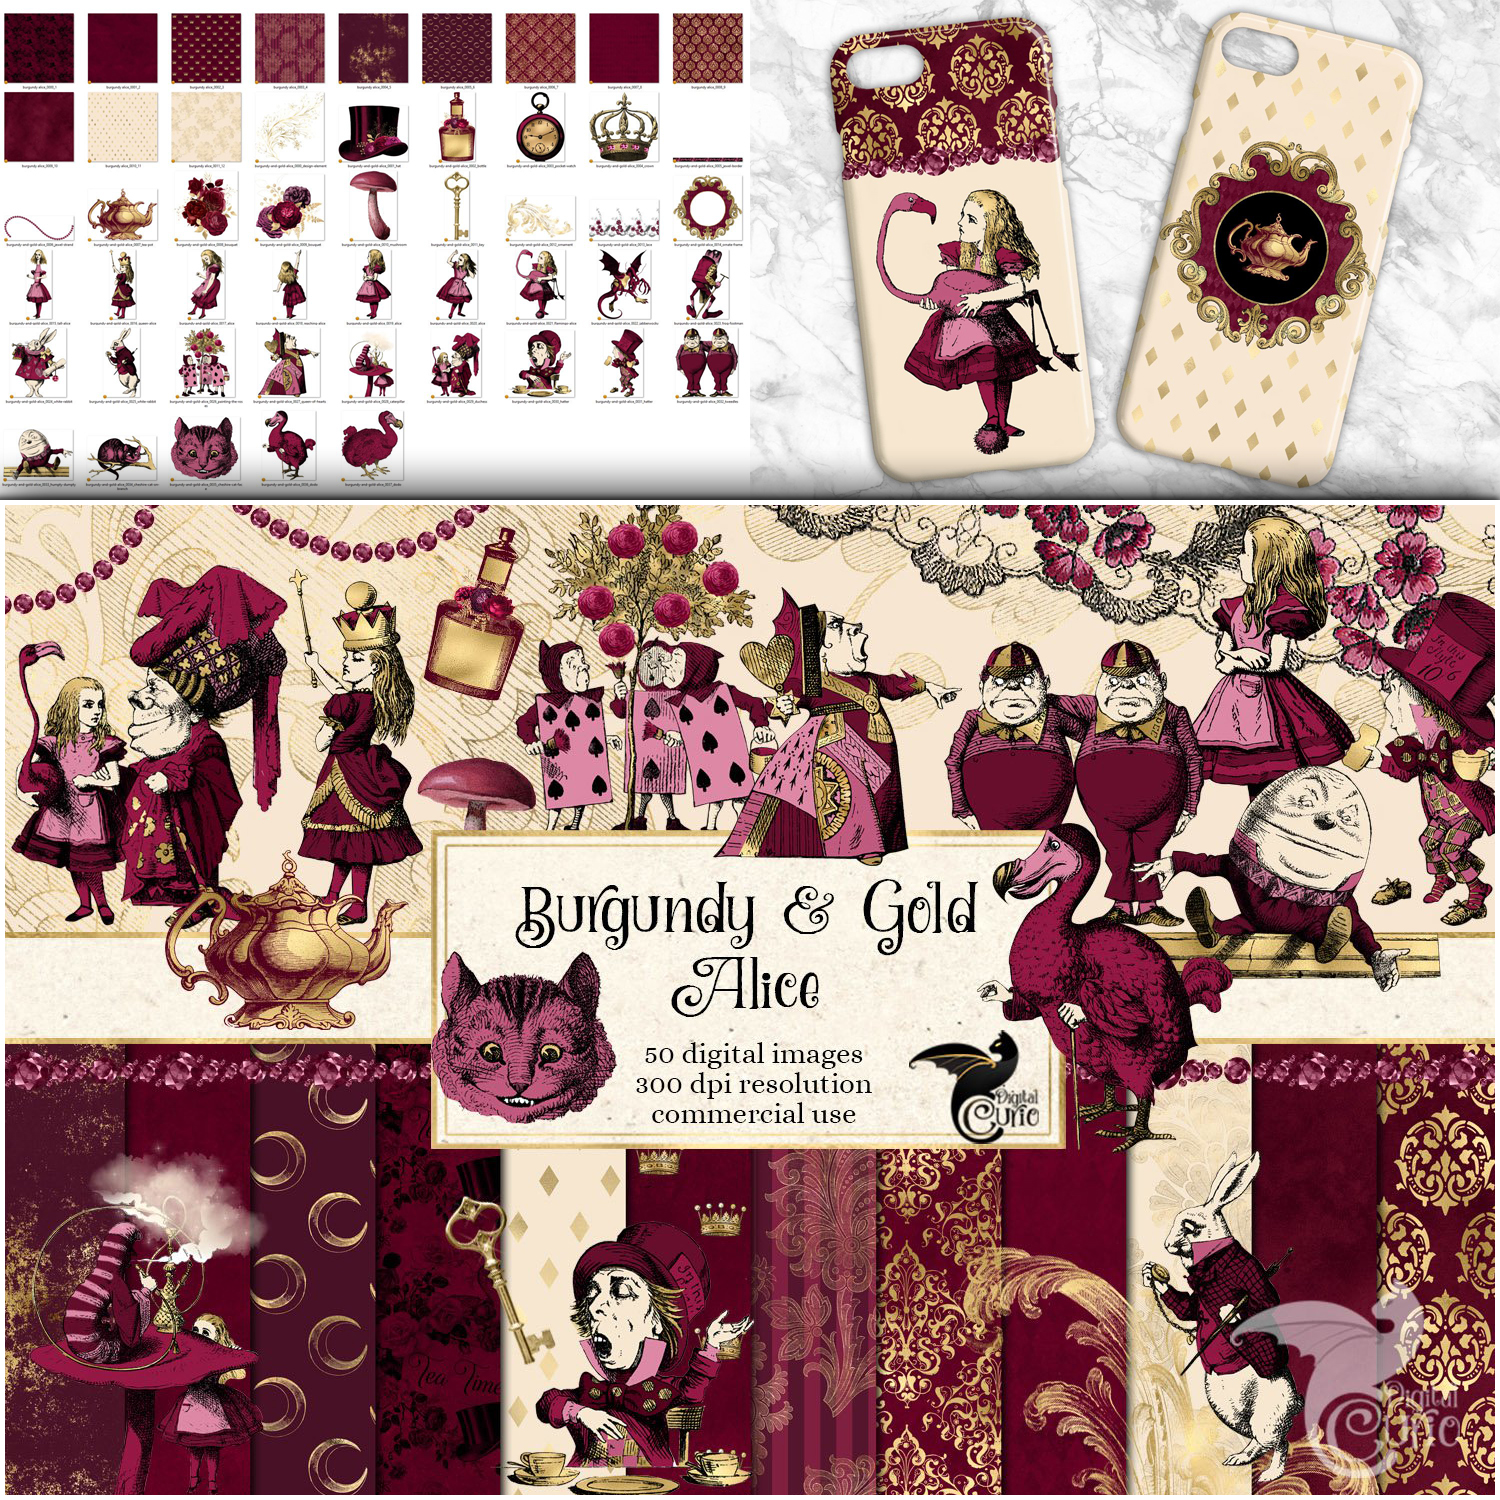 Preview burgundy and gold alice in wonderland graphics.